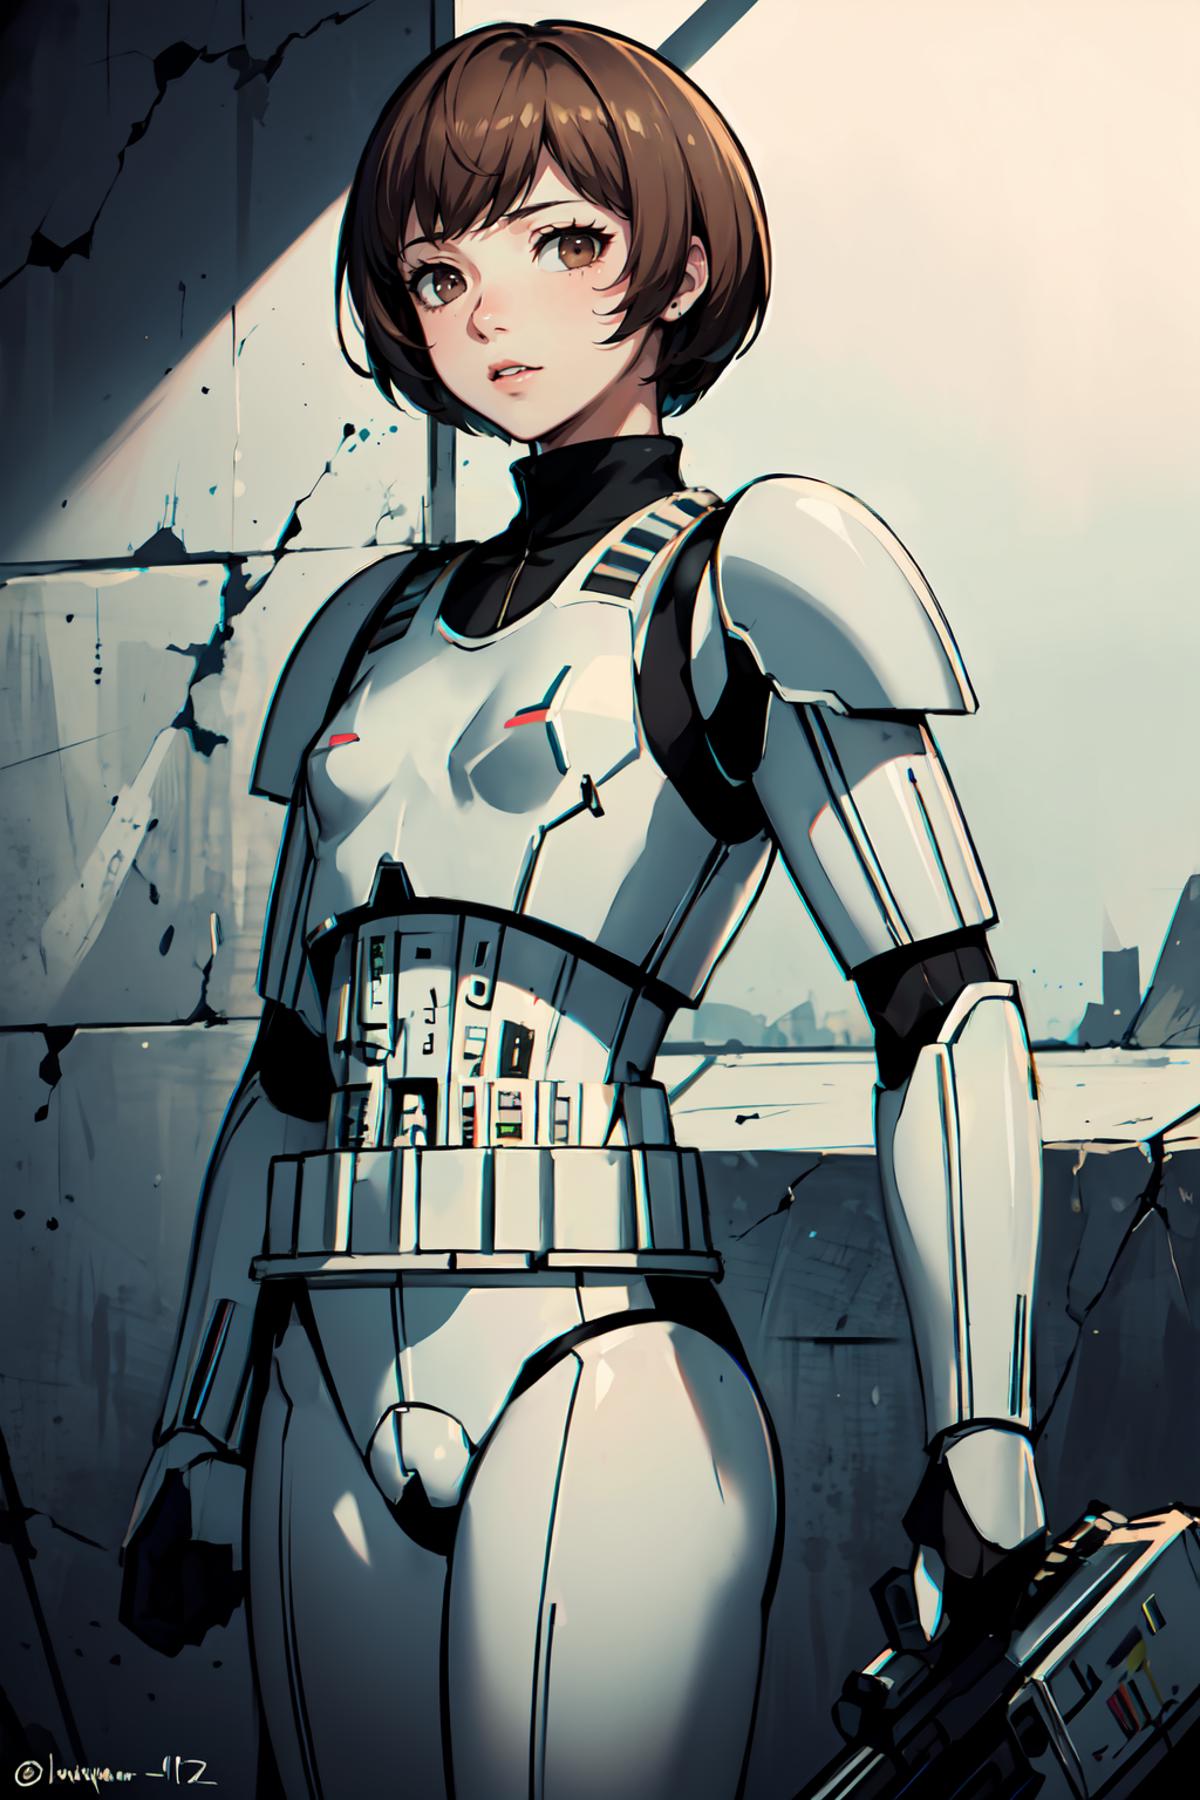 Stormtrooper Armor | Star Wars image by Maxetto